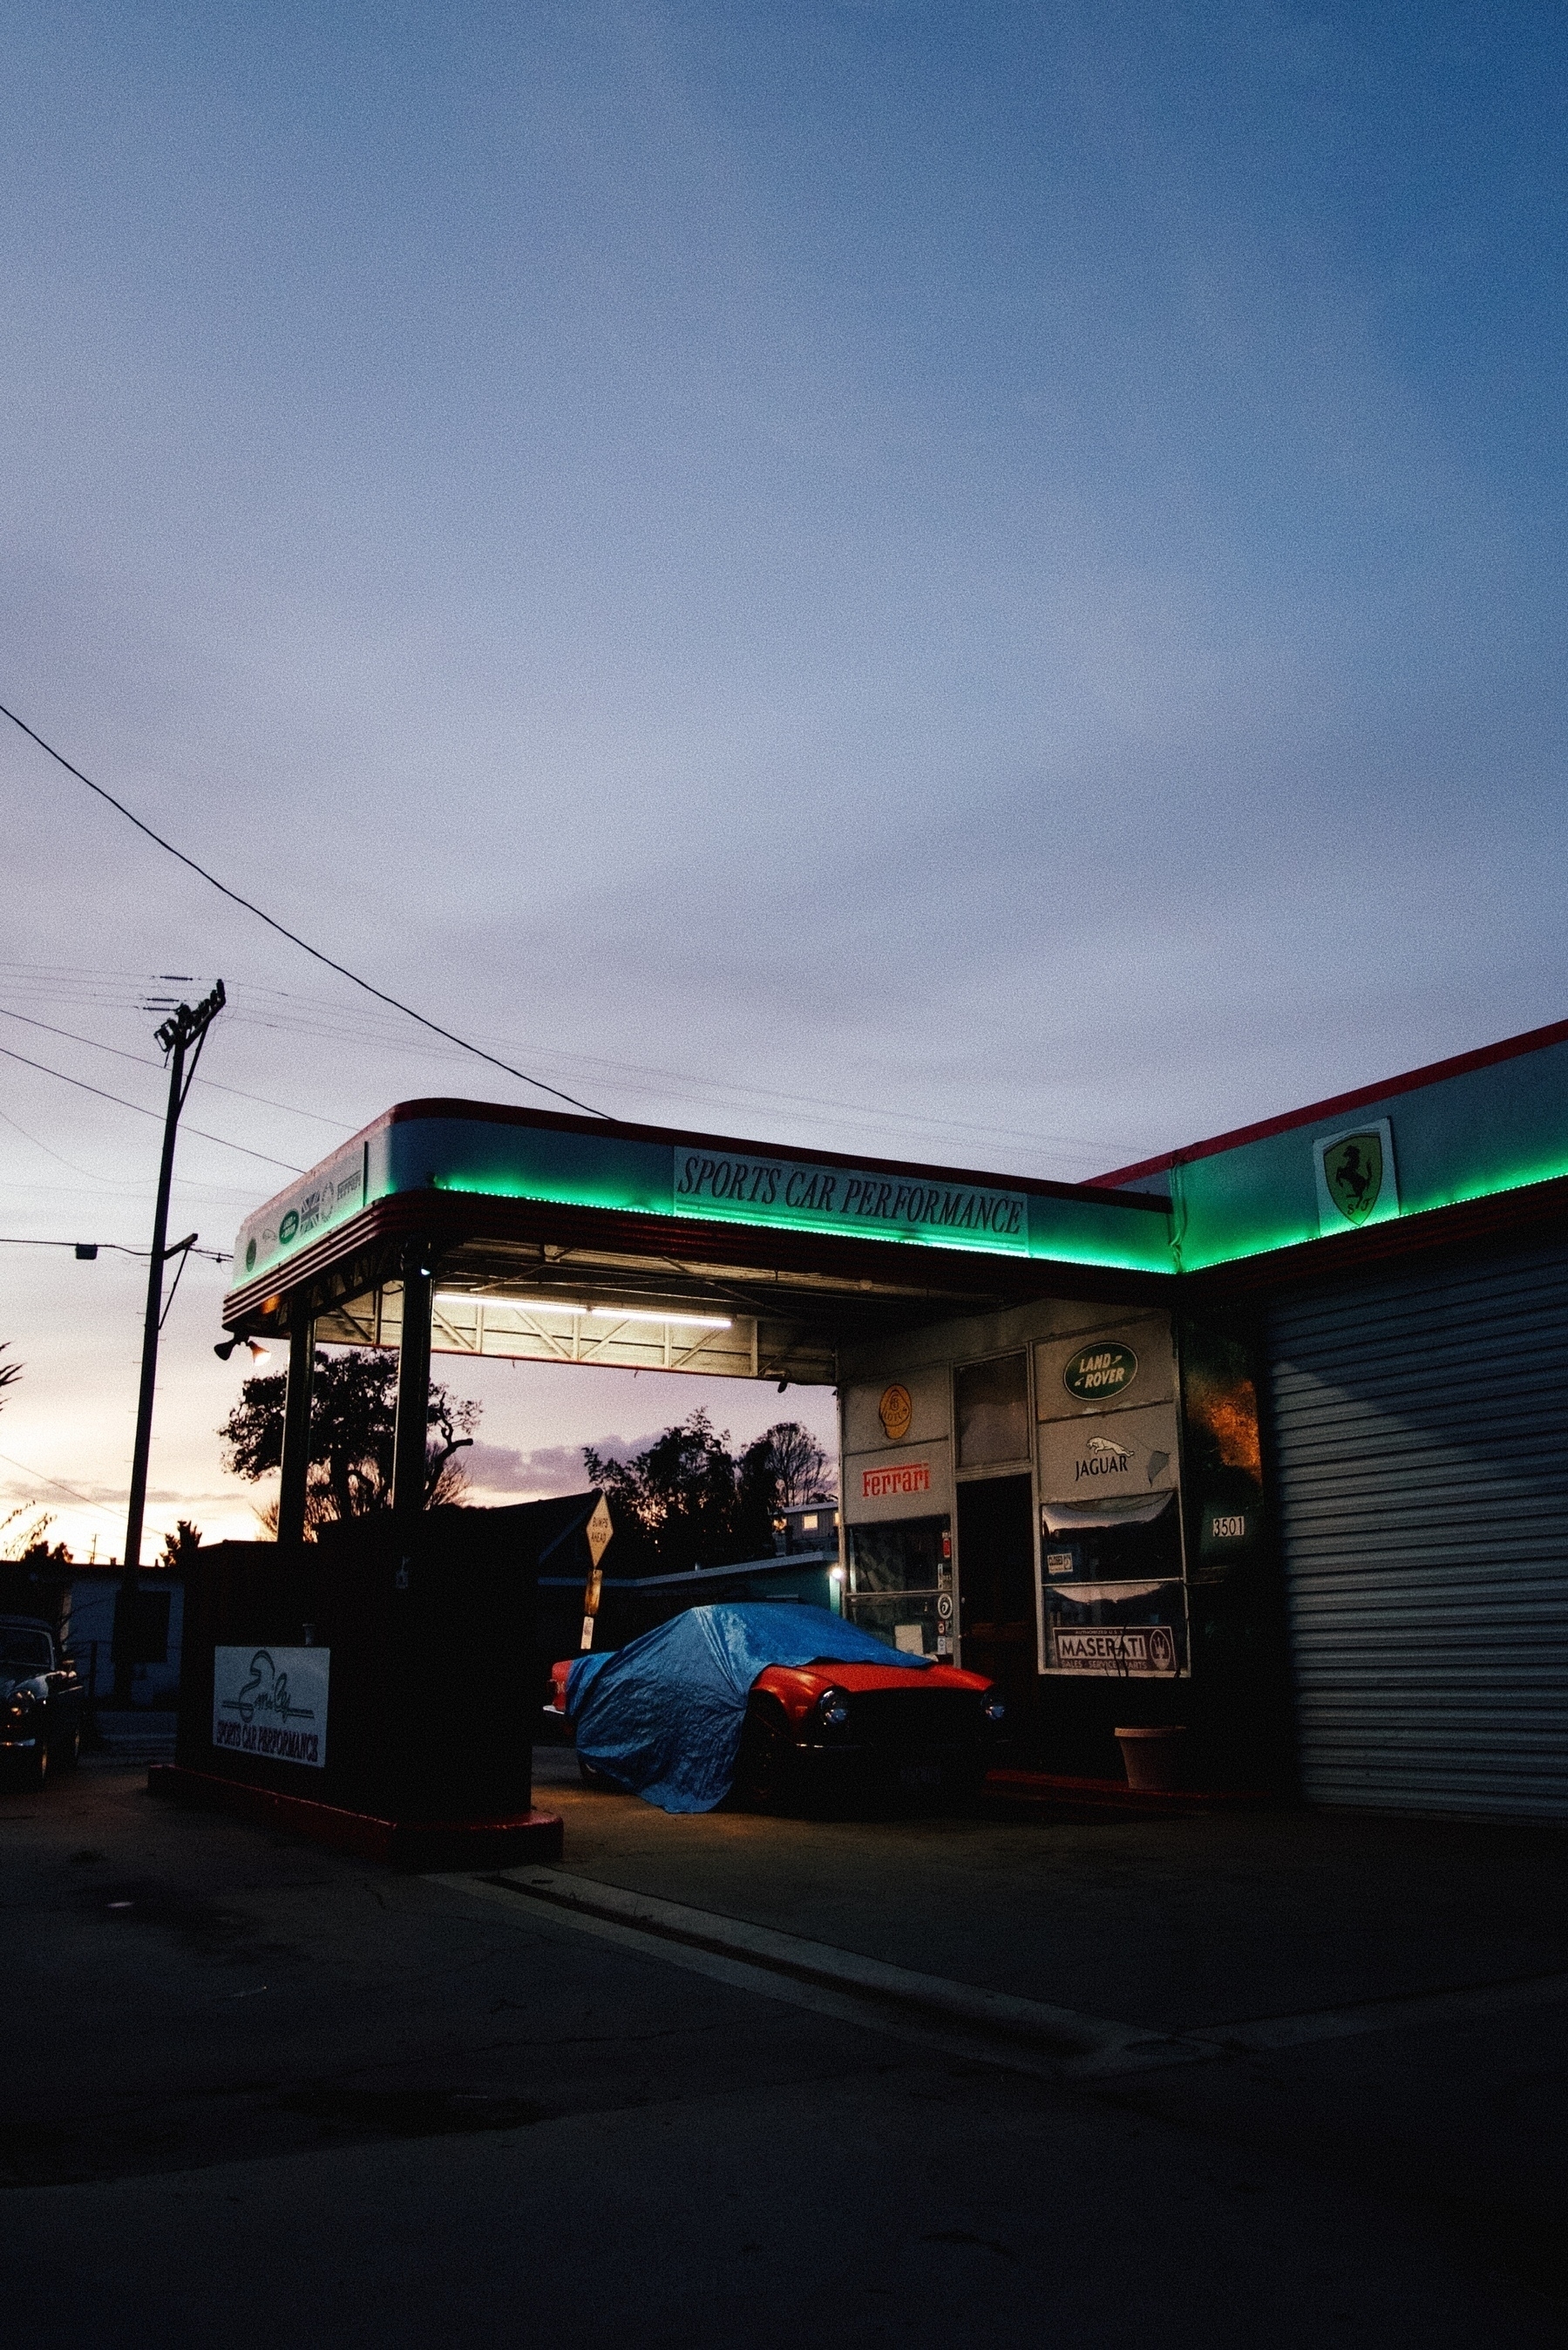 An auto shop just after sunset. A sign reads Sports Car Performance. Green trim lighting illuminates this sign and others. A red car is halfway covered underneath it.